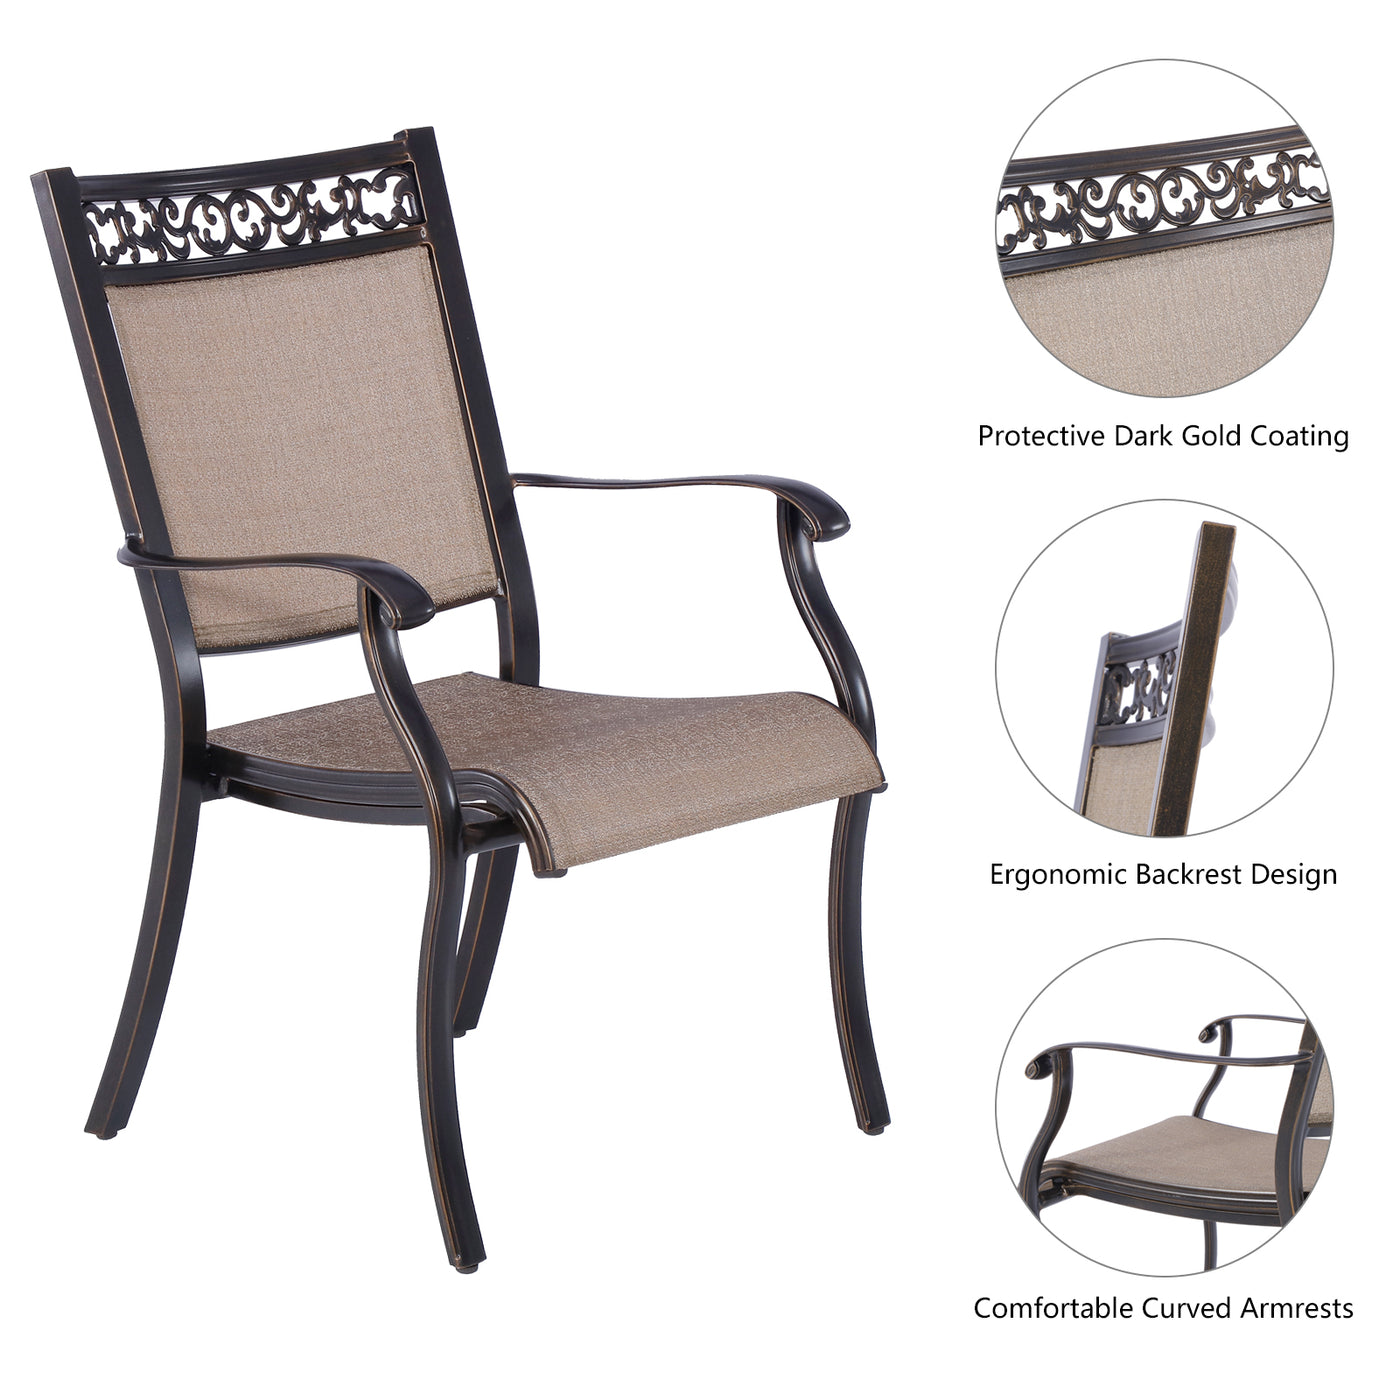 Patio Dining Rustproof Fabric Chairs Set of 4 Alumin Sling Chairs with Armrests